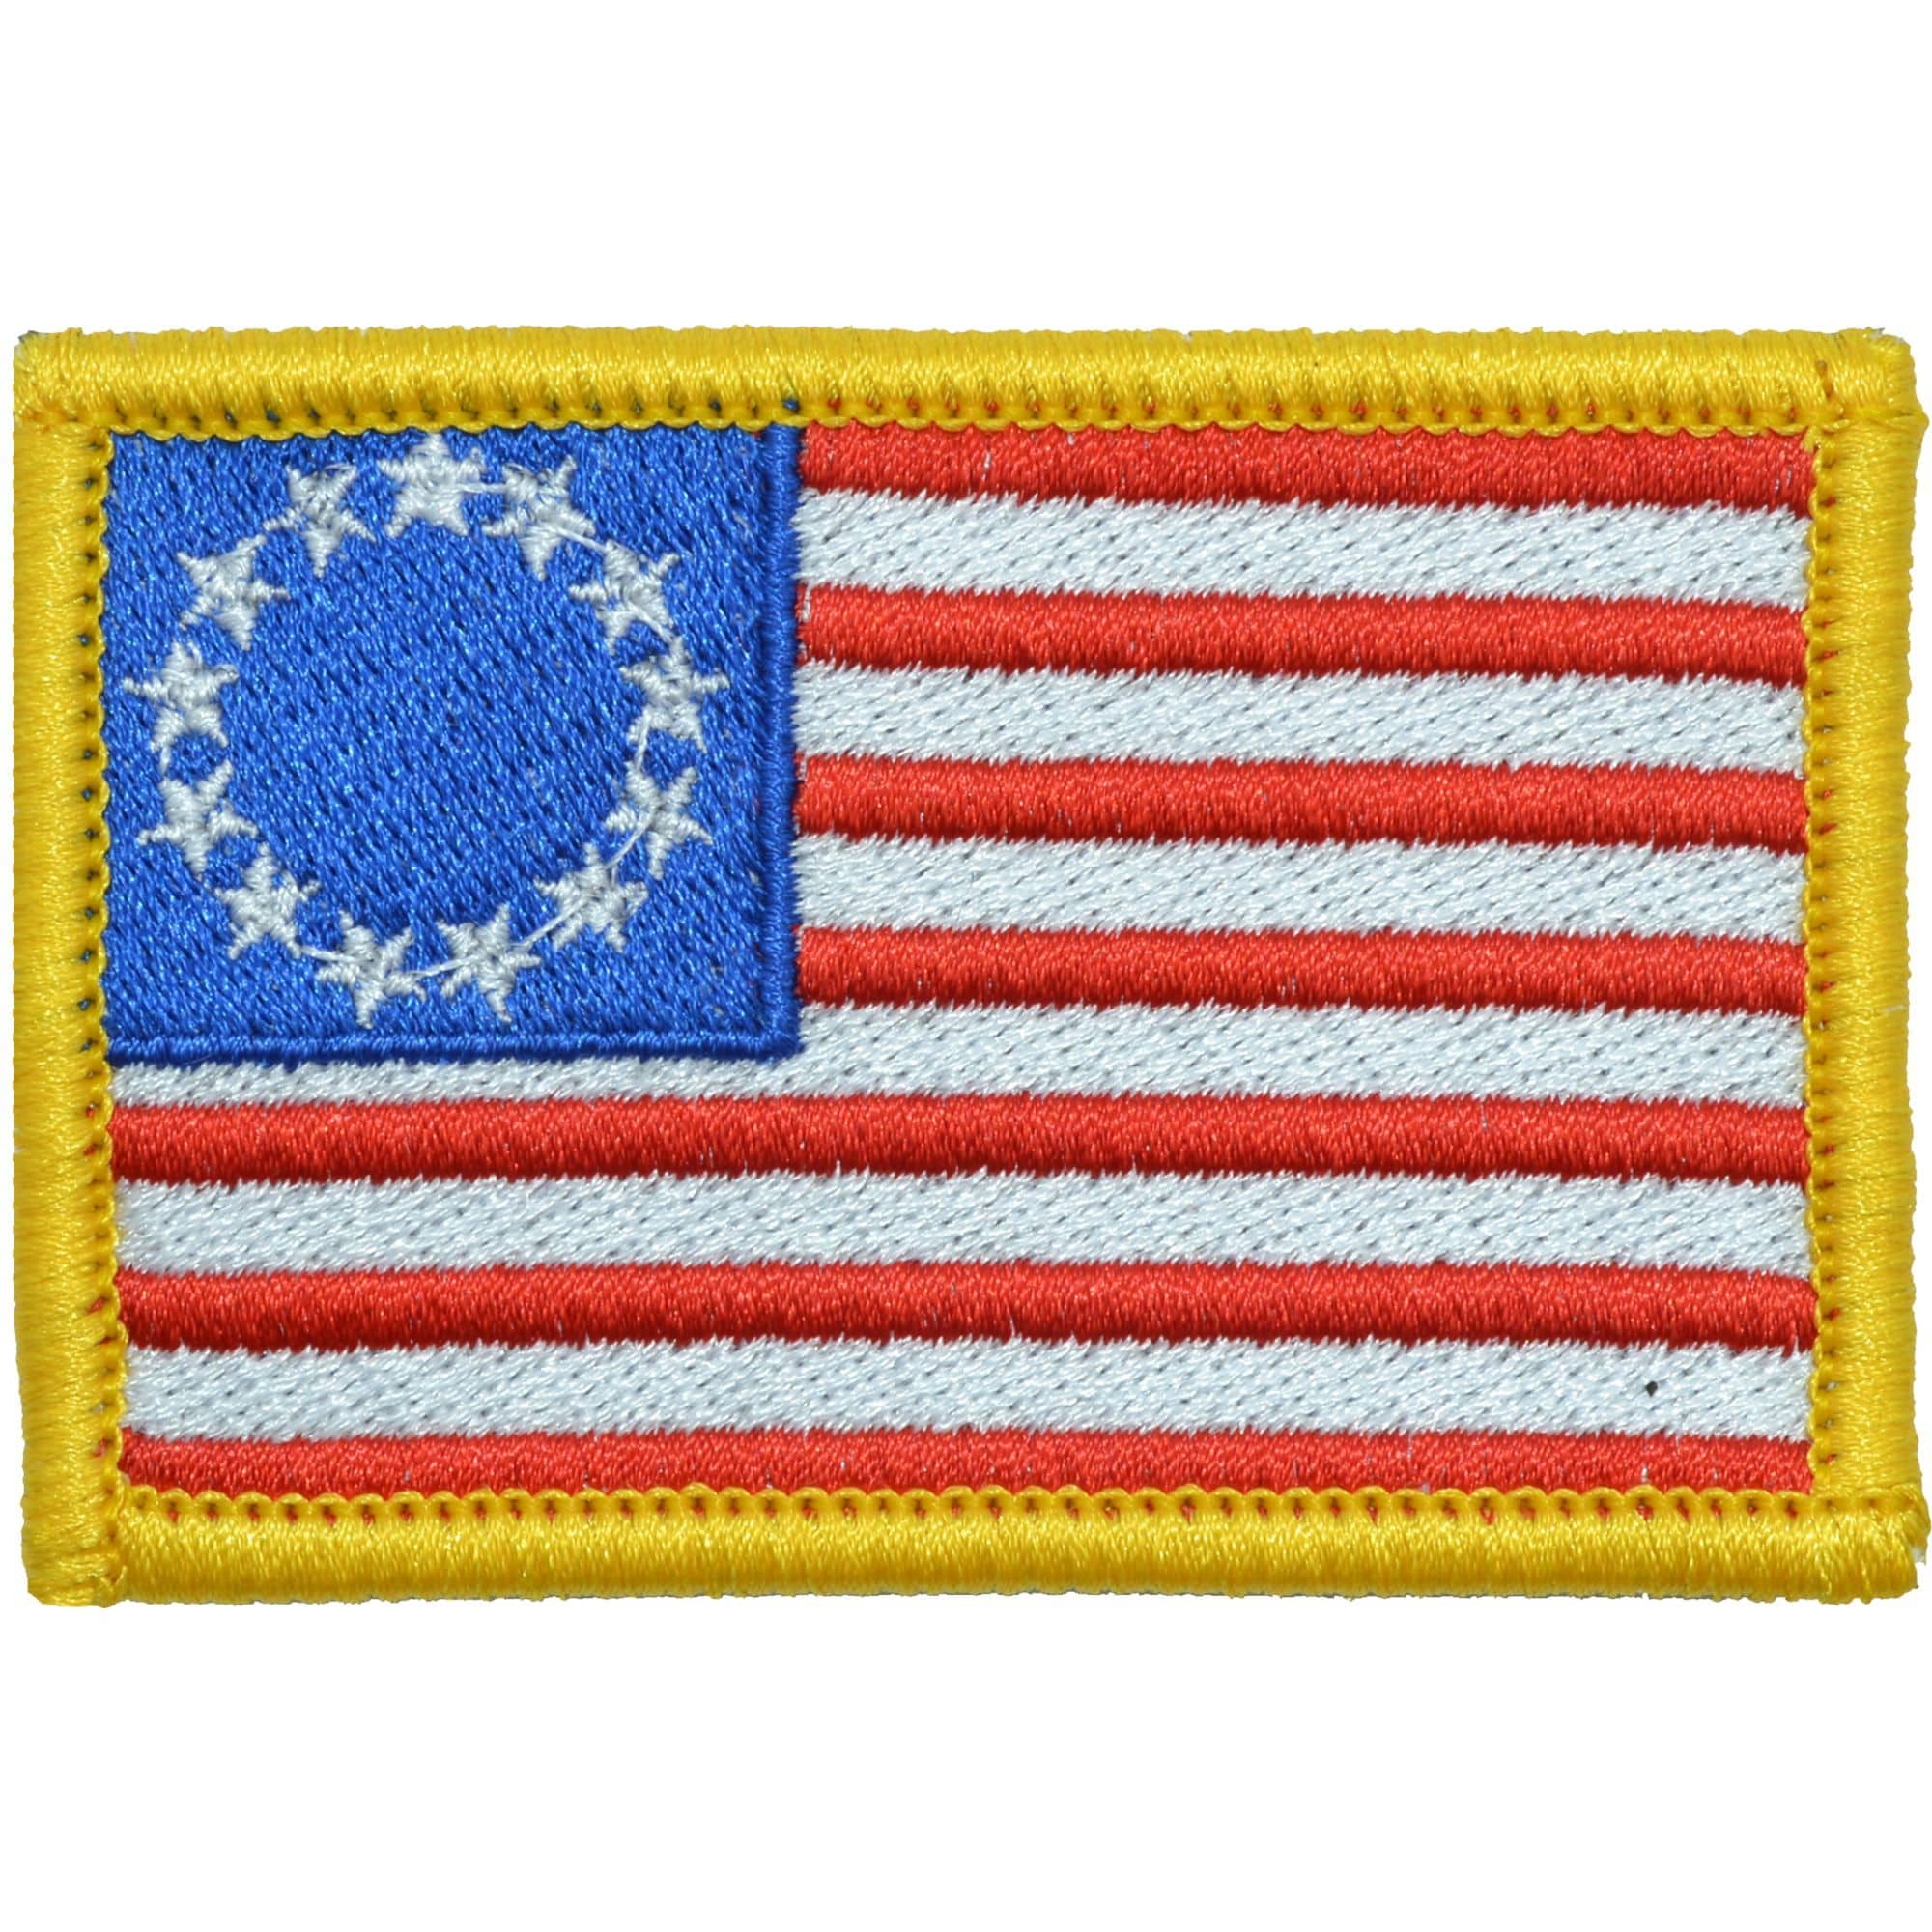 Tactical Gear Junkie Patches Full Color Betsy Ross Flag - 2x3 Patch